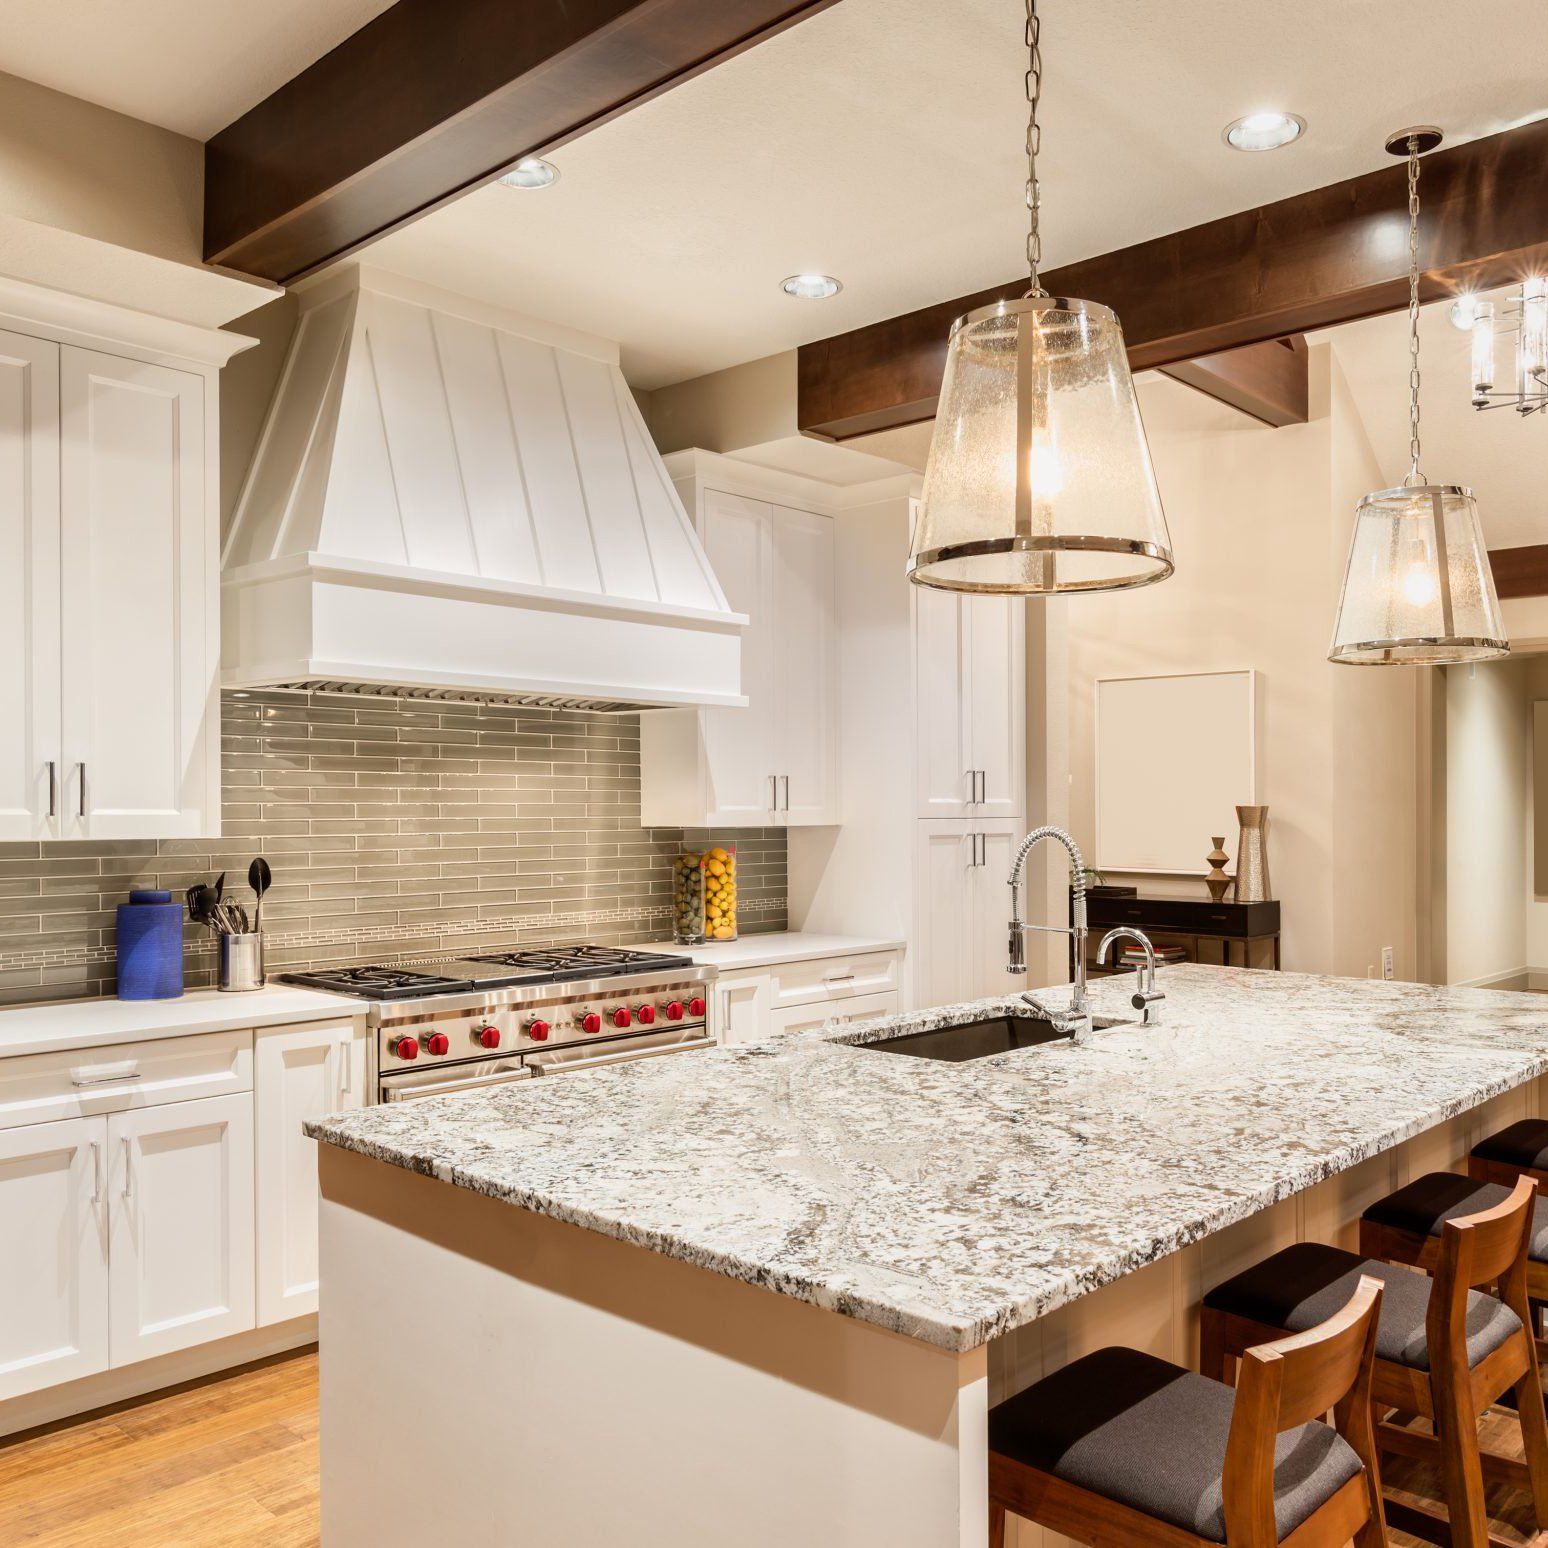 A Premier Design and Build Firm in the Rockville, Maryland Area.